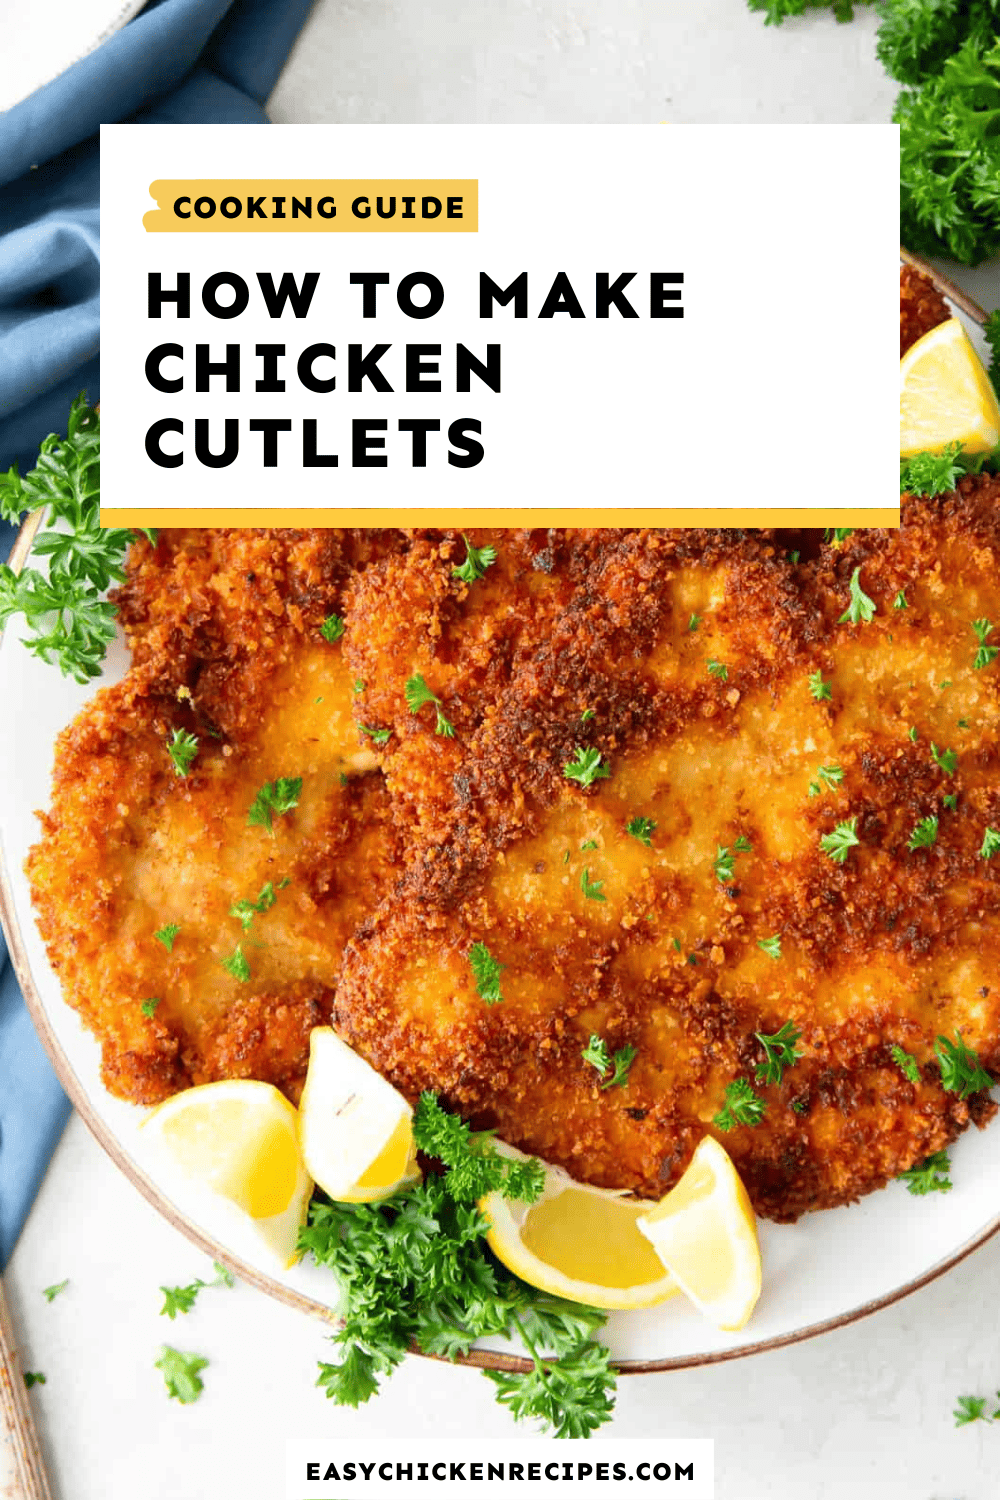 fried chickened cutlets on a plate, with text overlay that reads: how to make chicken cutlets.